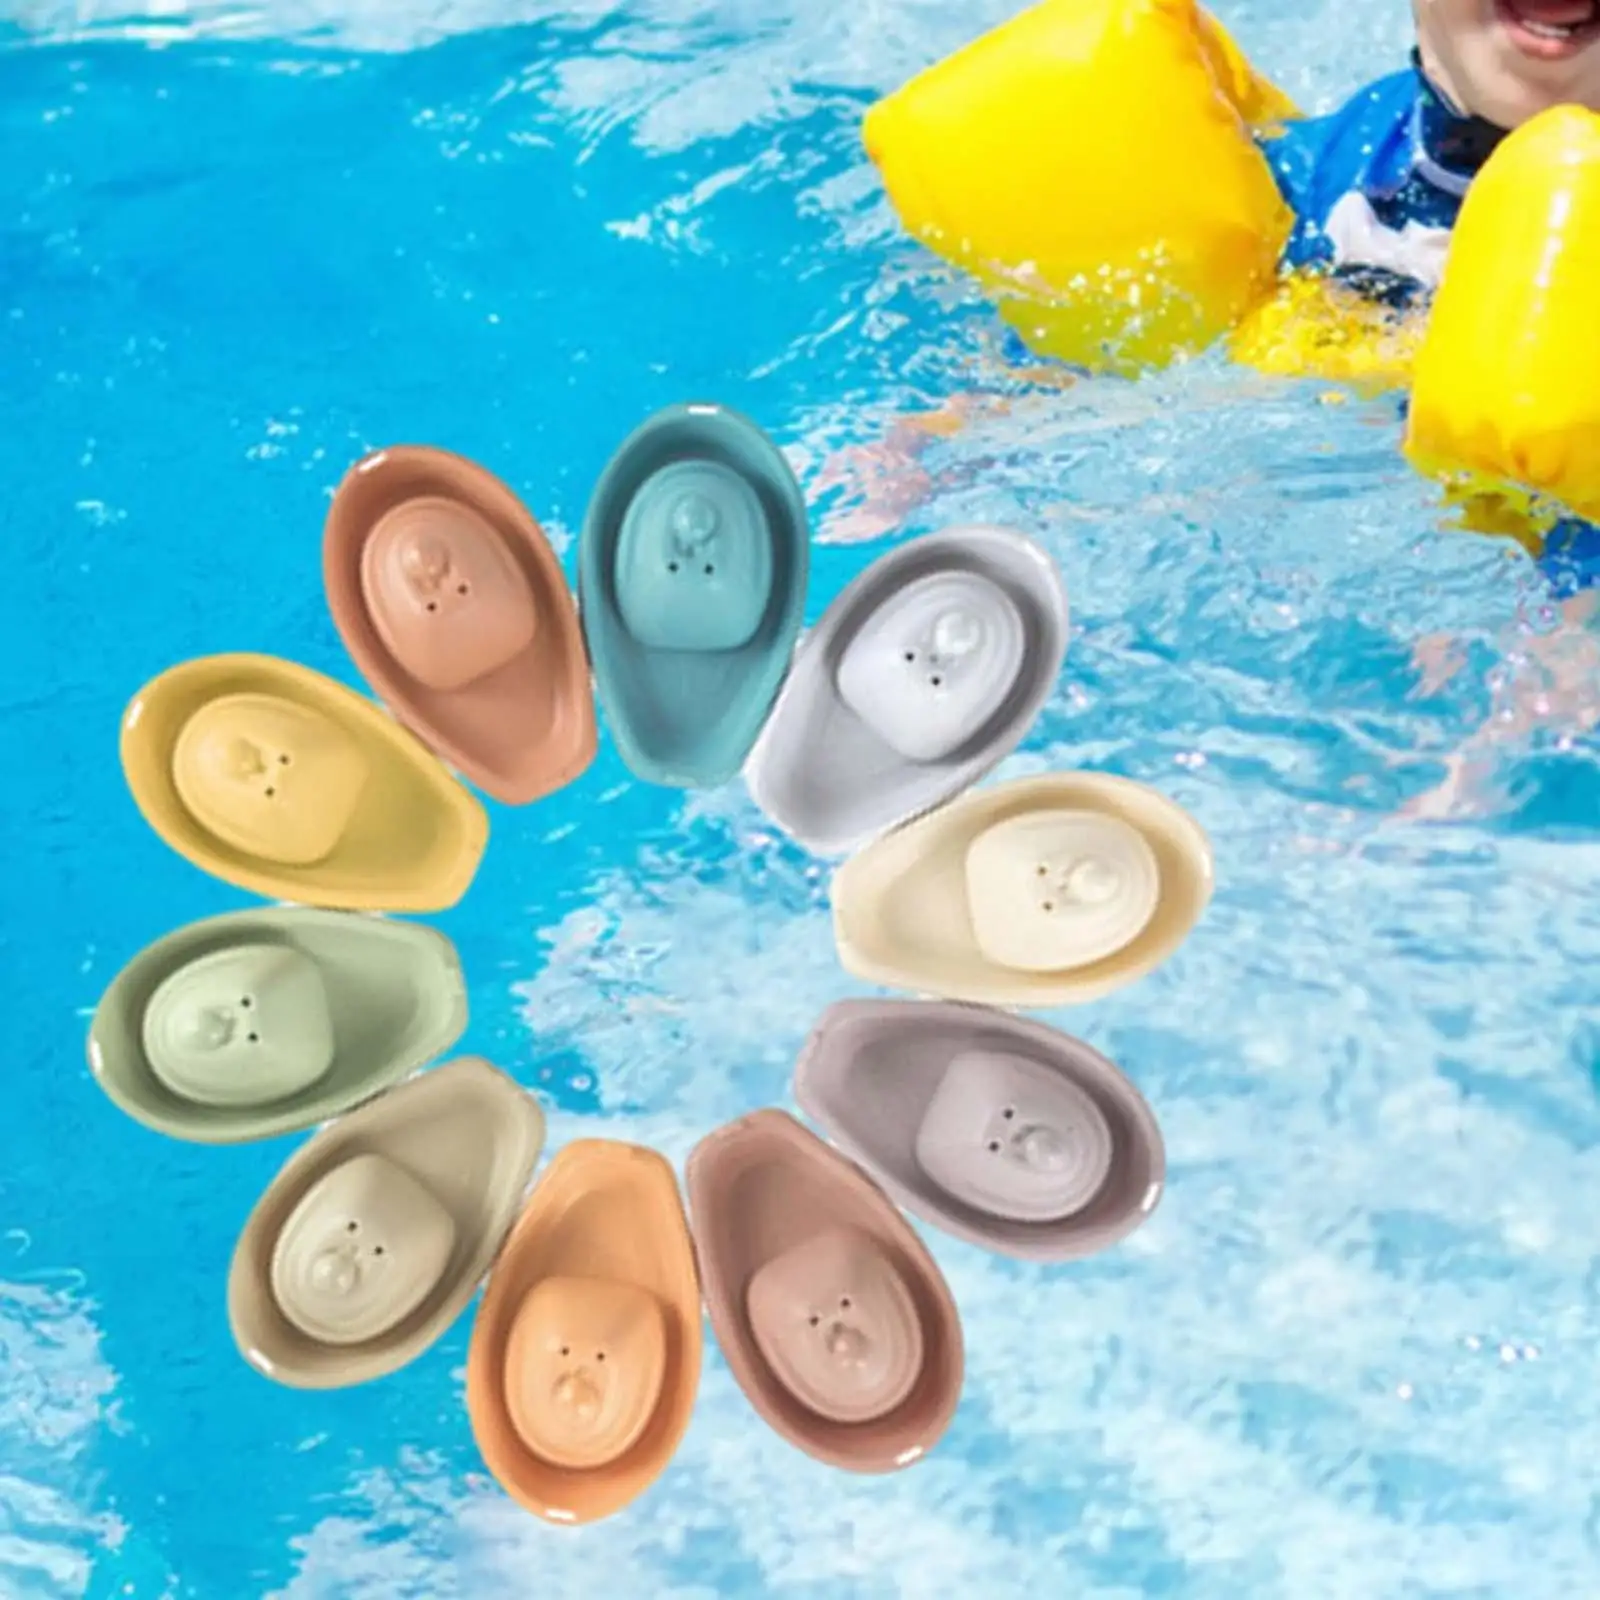 10x Stackable Bath Boats Toys Montessori Water Table Toys Floating & Stacking Toy for Boys Girls Preschool Birthday Gift Babies